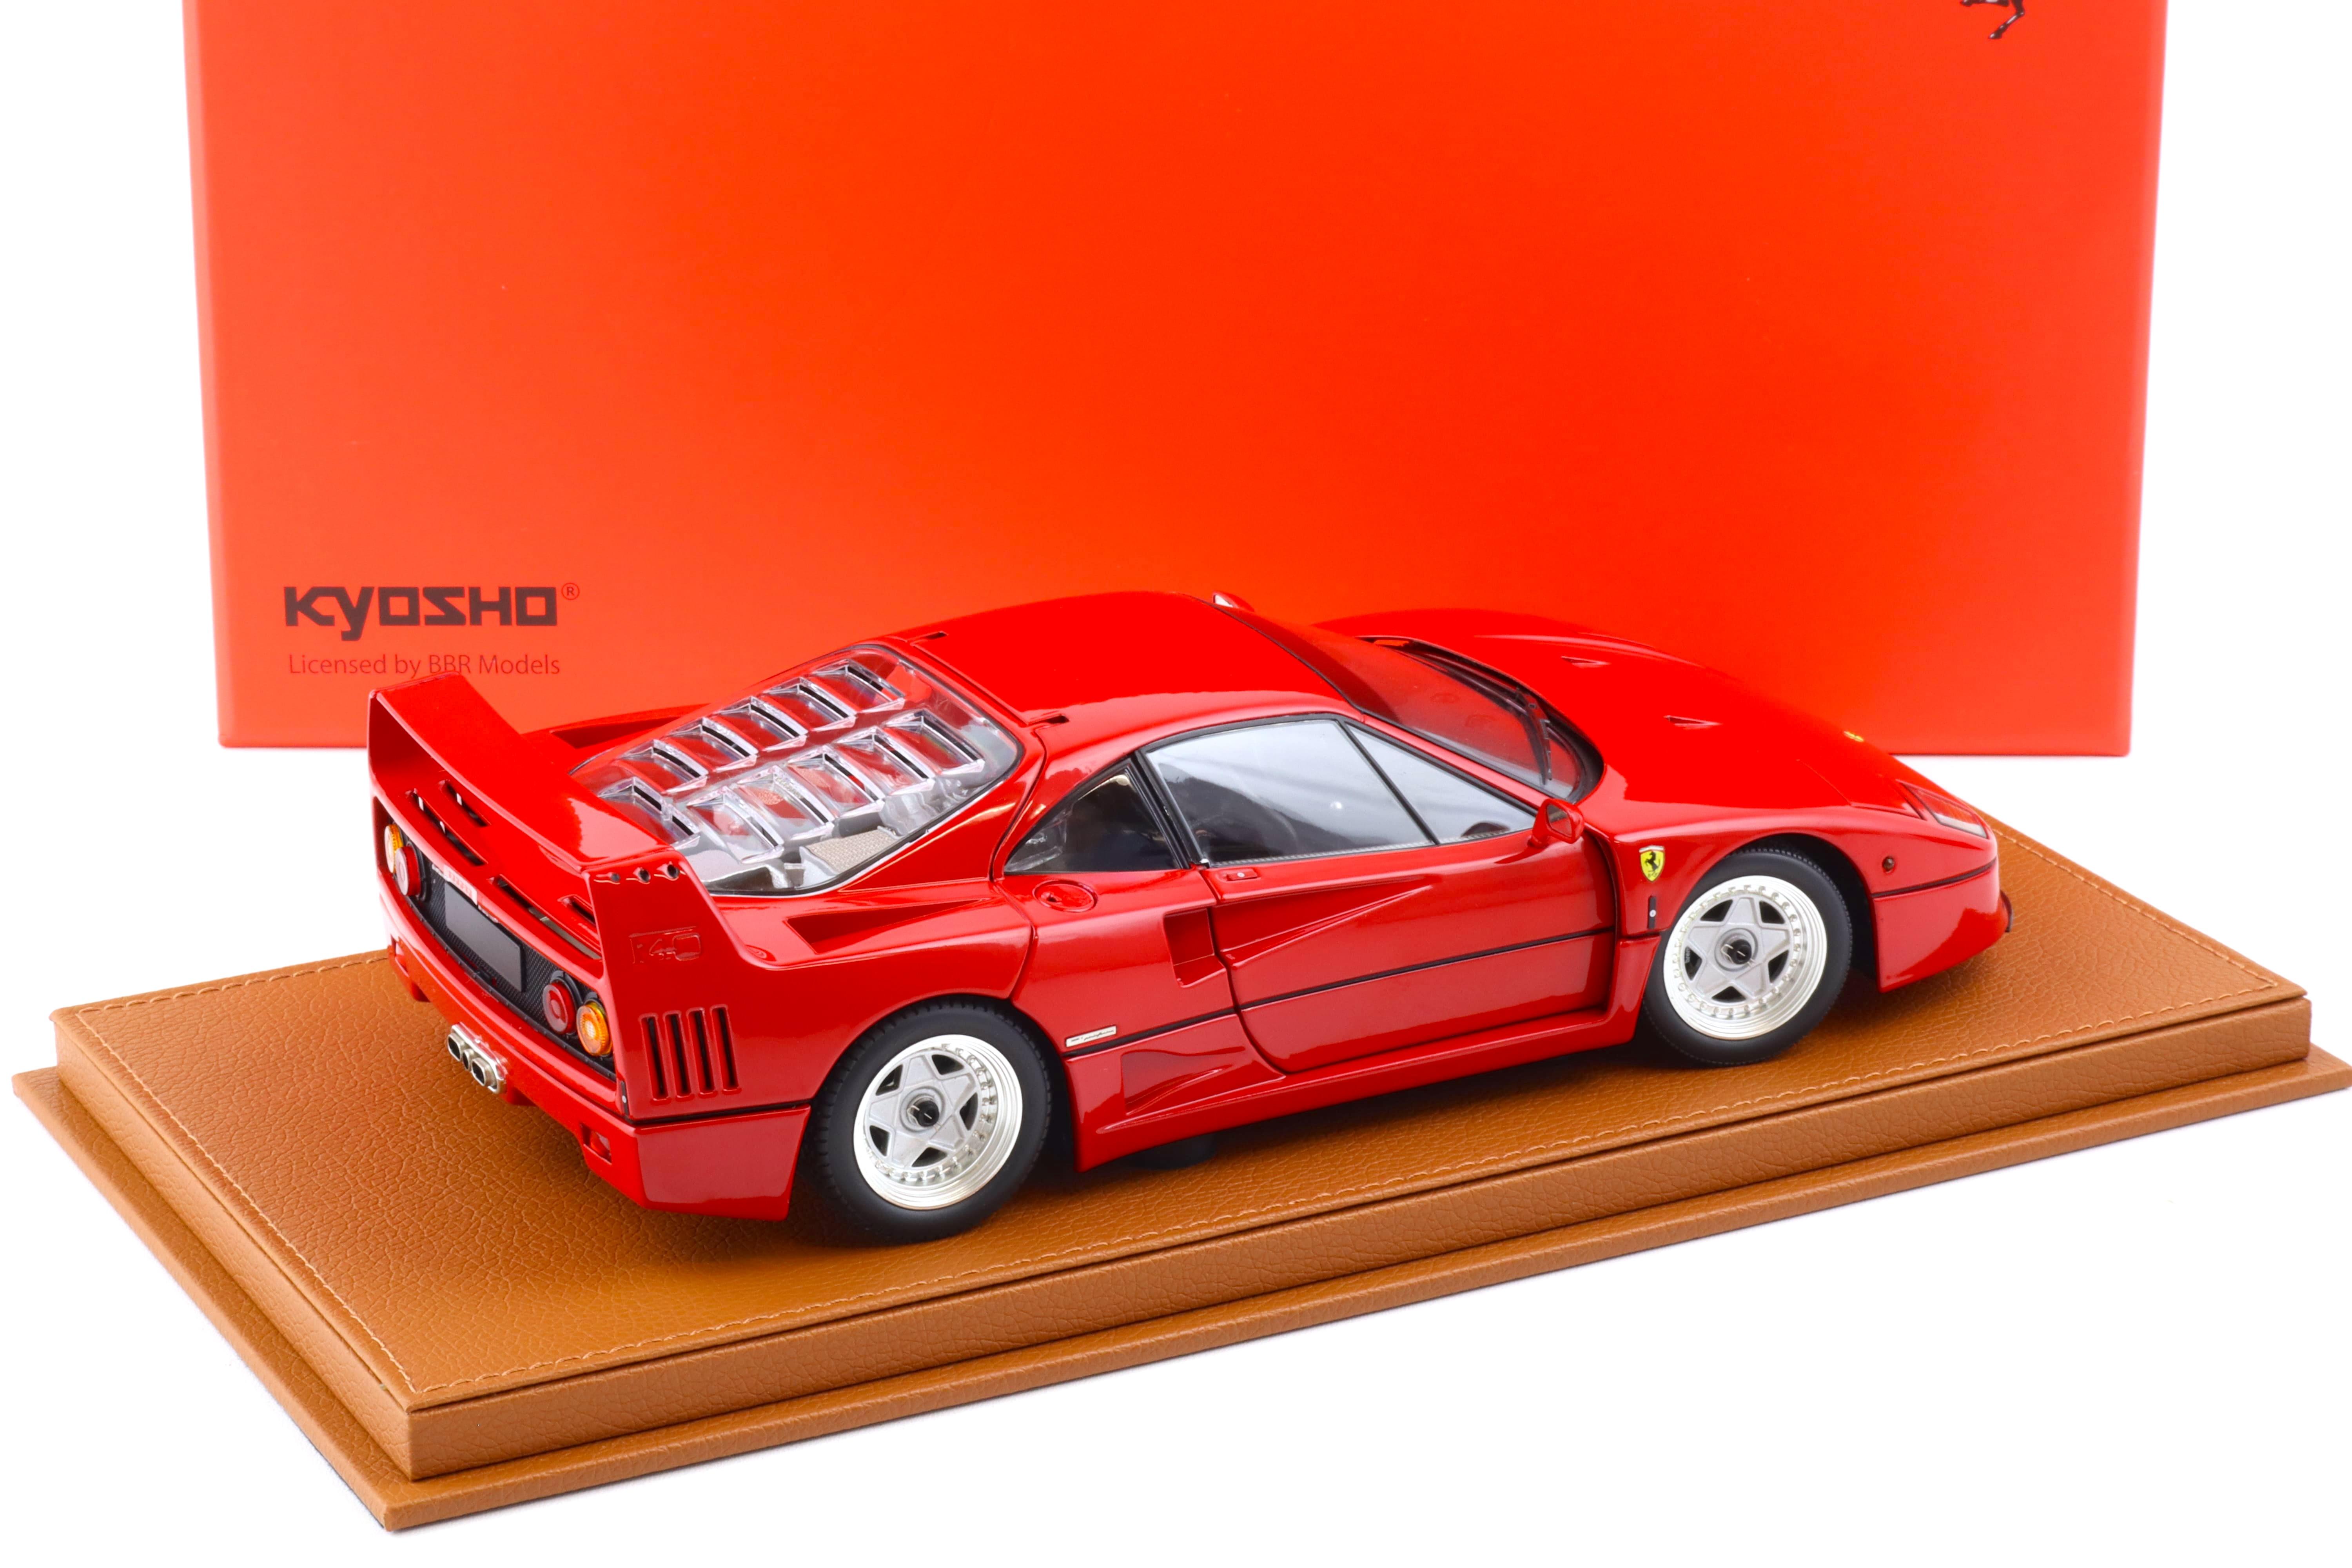 1:18 BBR Kyosho Ferrari F40 Valeo S/N red personal car Gianno Agnelli with Showcase - Limited 300 pcs.